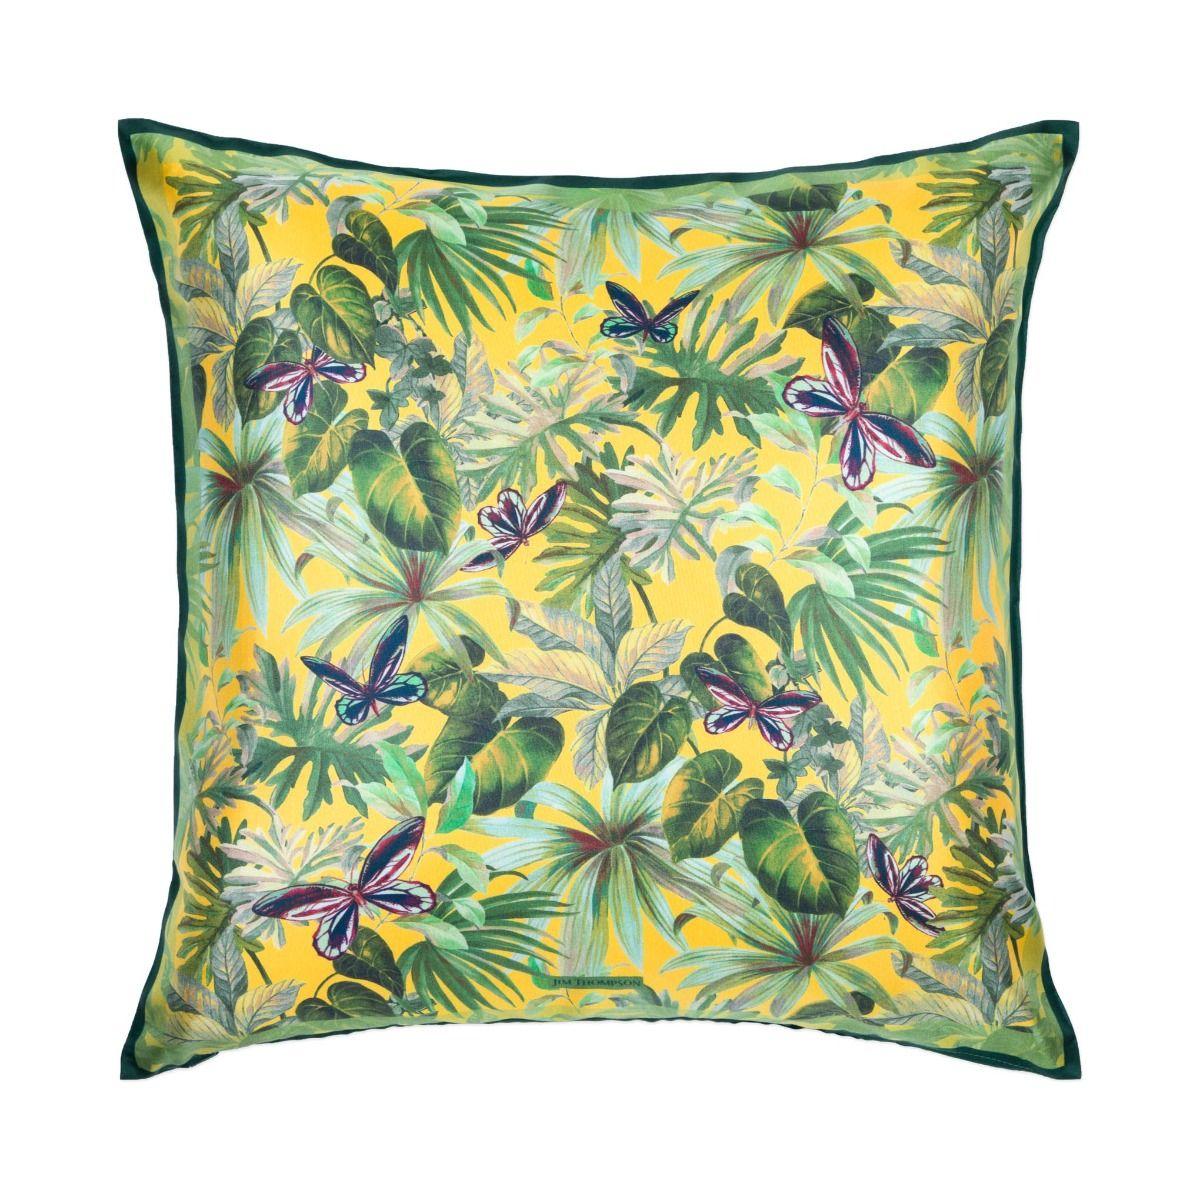 Leaves and Butterflies Silk Cushion Cover 18" - Green/Yellow